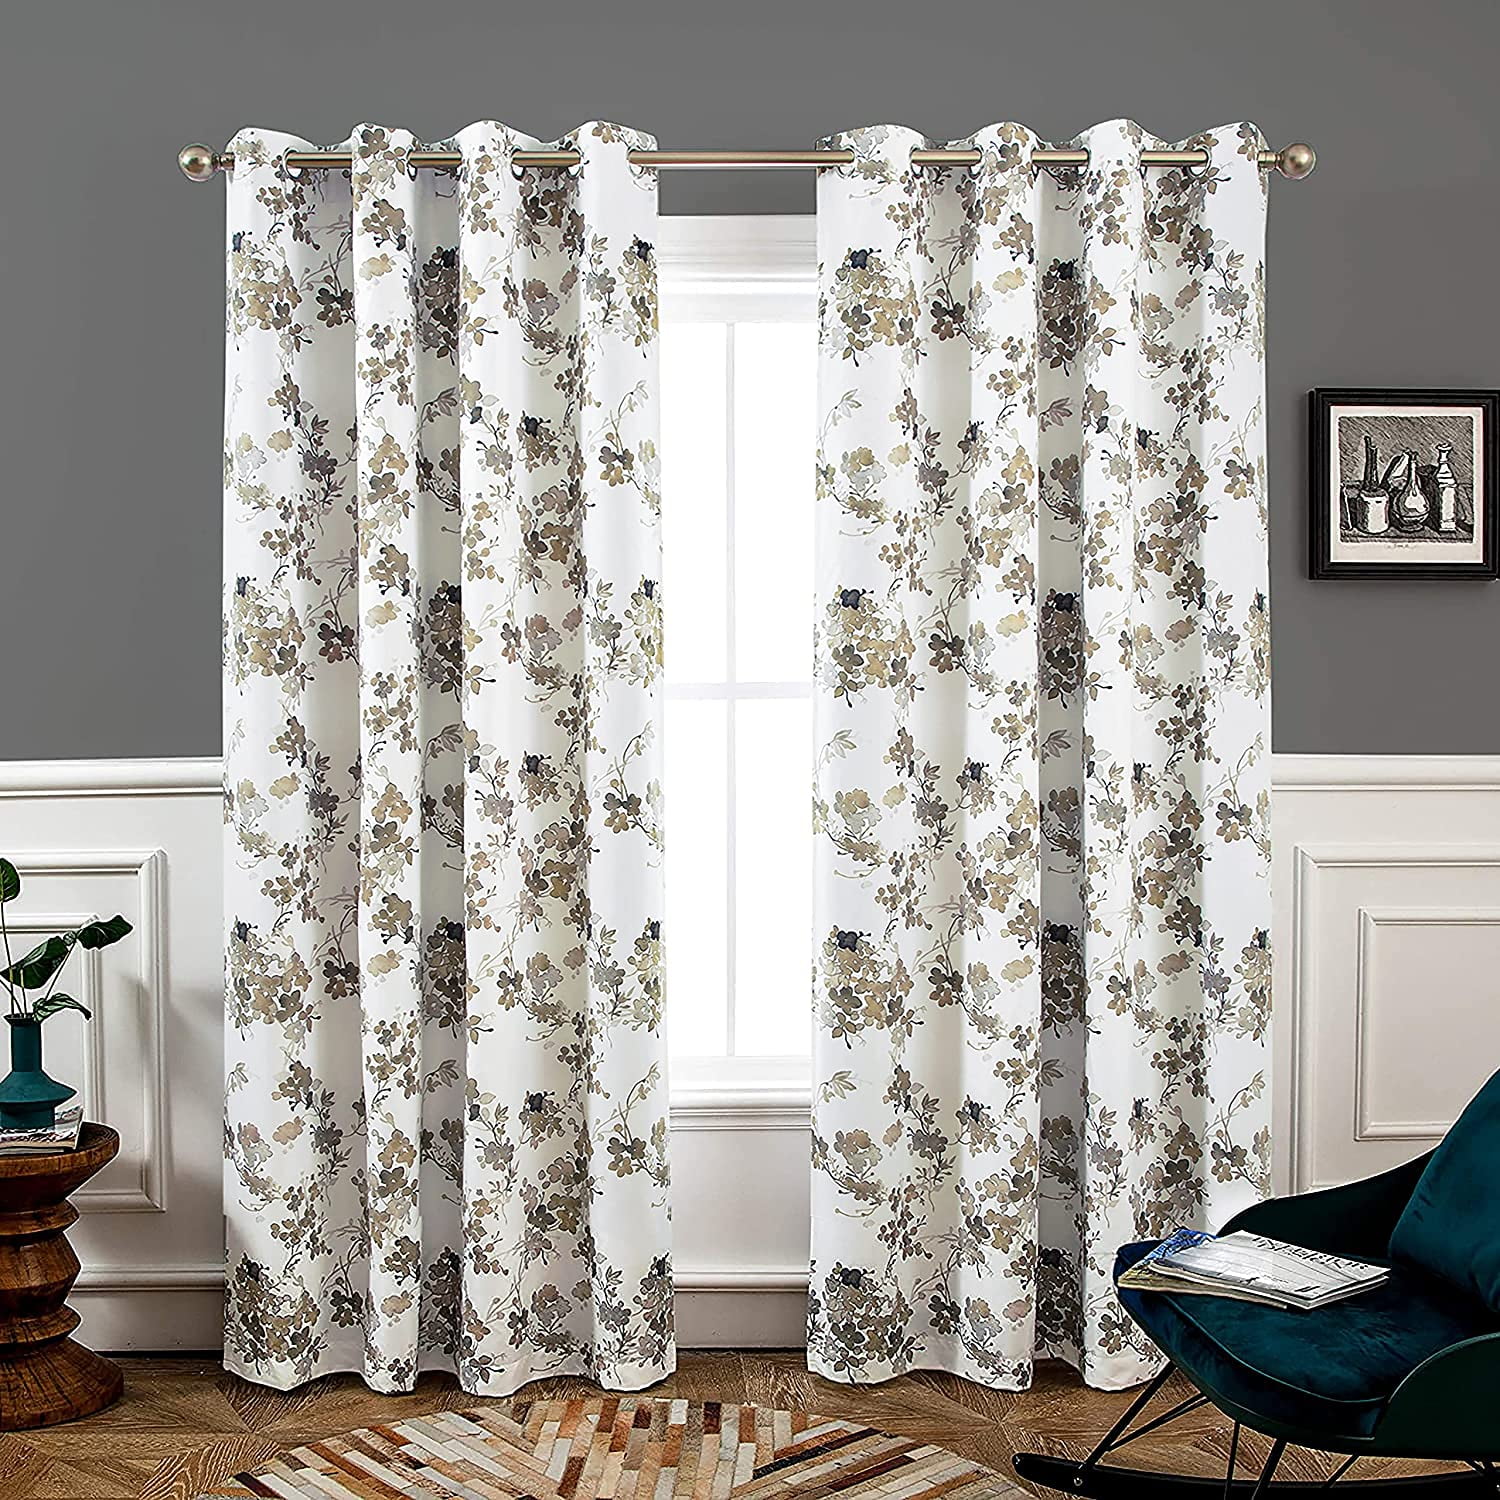 DriftAway Ryan Sketch Branch Leaves Blackout Room Darkening Grommet Lined Thermal Insulated Energy Saving Window Curtains 2 Layers 2 Panels Each 52 Inch by 84 Inch Black Line 